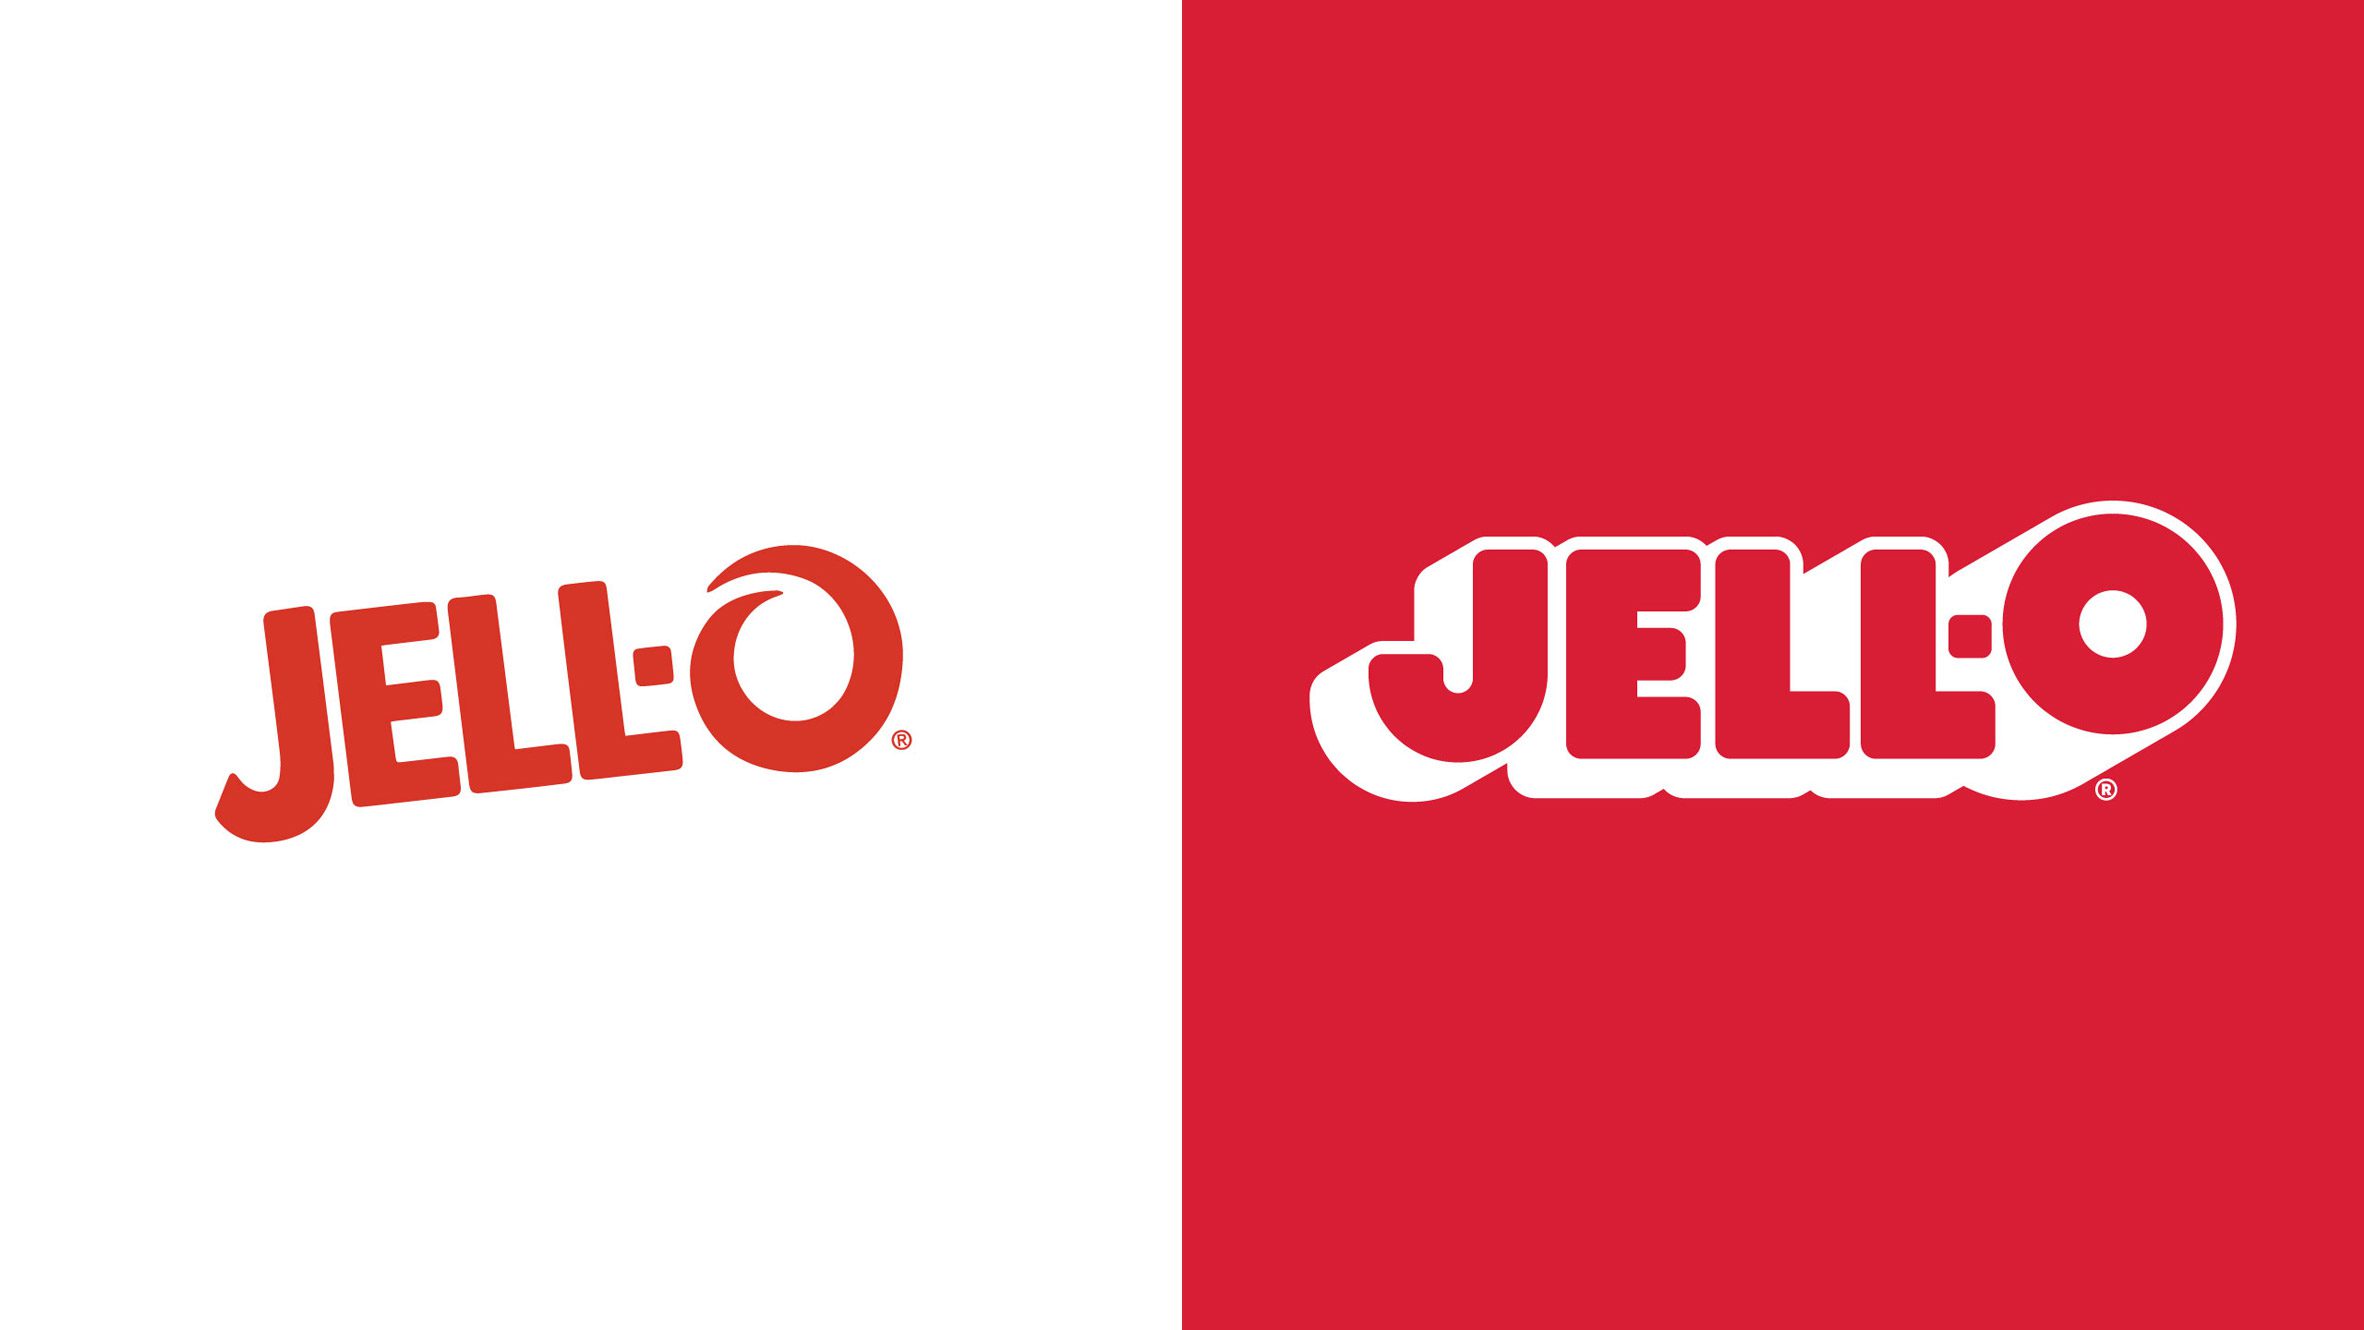 A comparison of old and new Jell-O logos